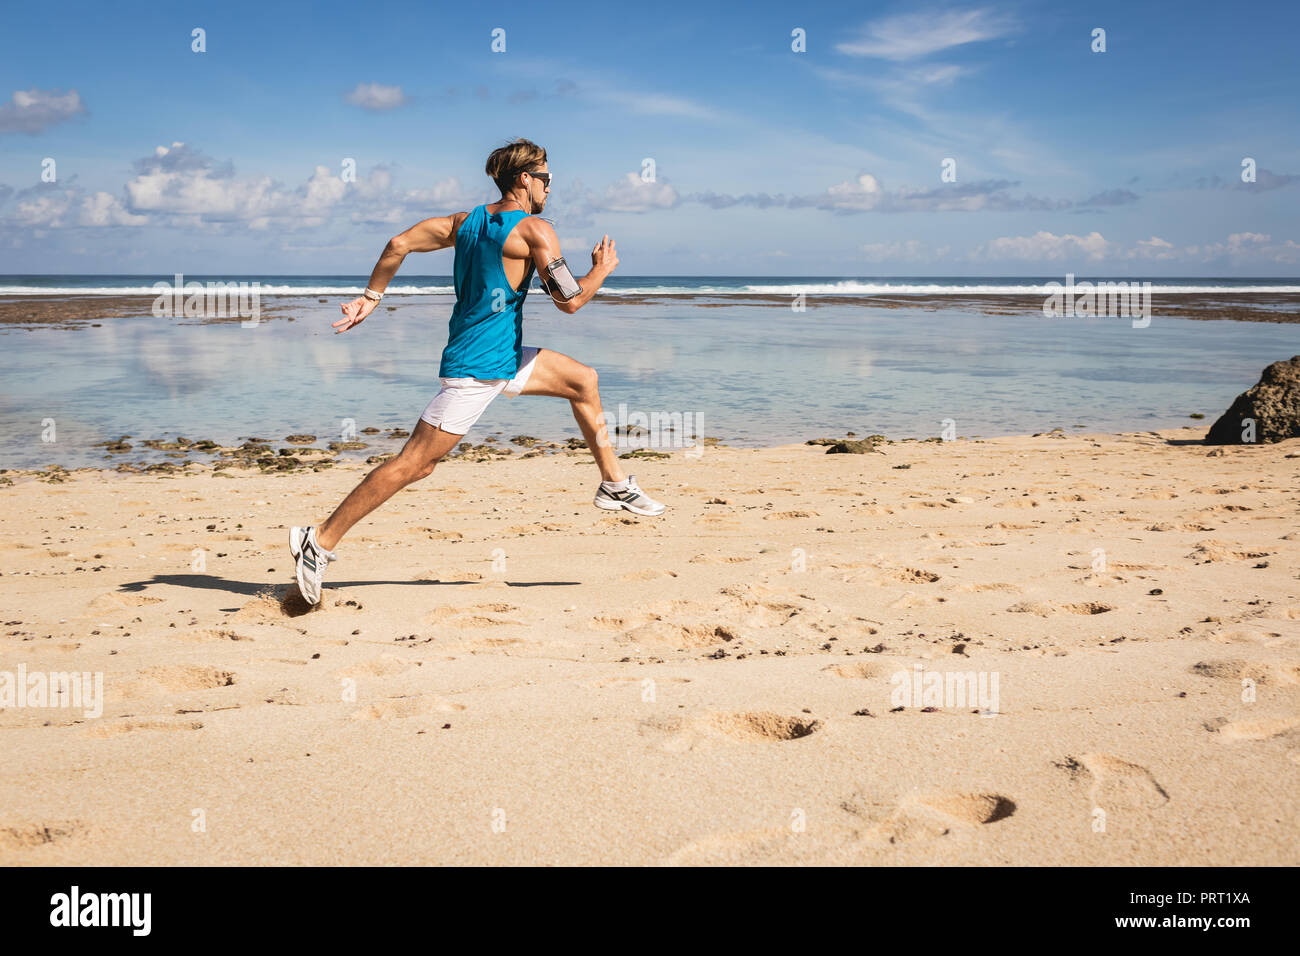 athletic man running and jumping on sand beach near sea, Bali, Indonesia Stock Photo